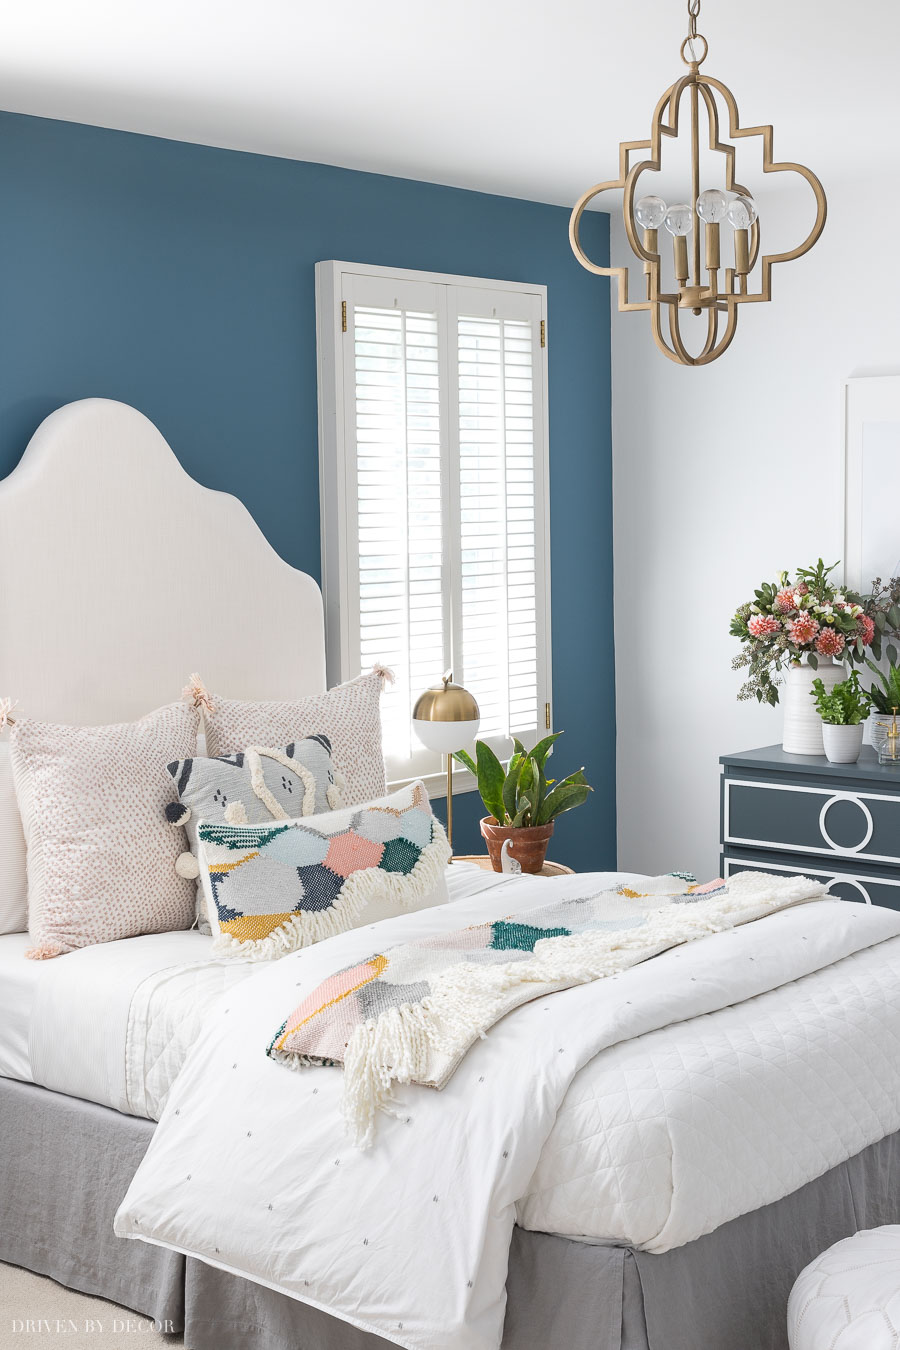 Colorful boho chic teen bedroom! All paint colors and sources included in the post!